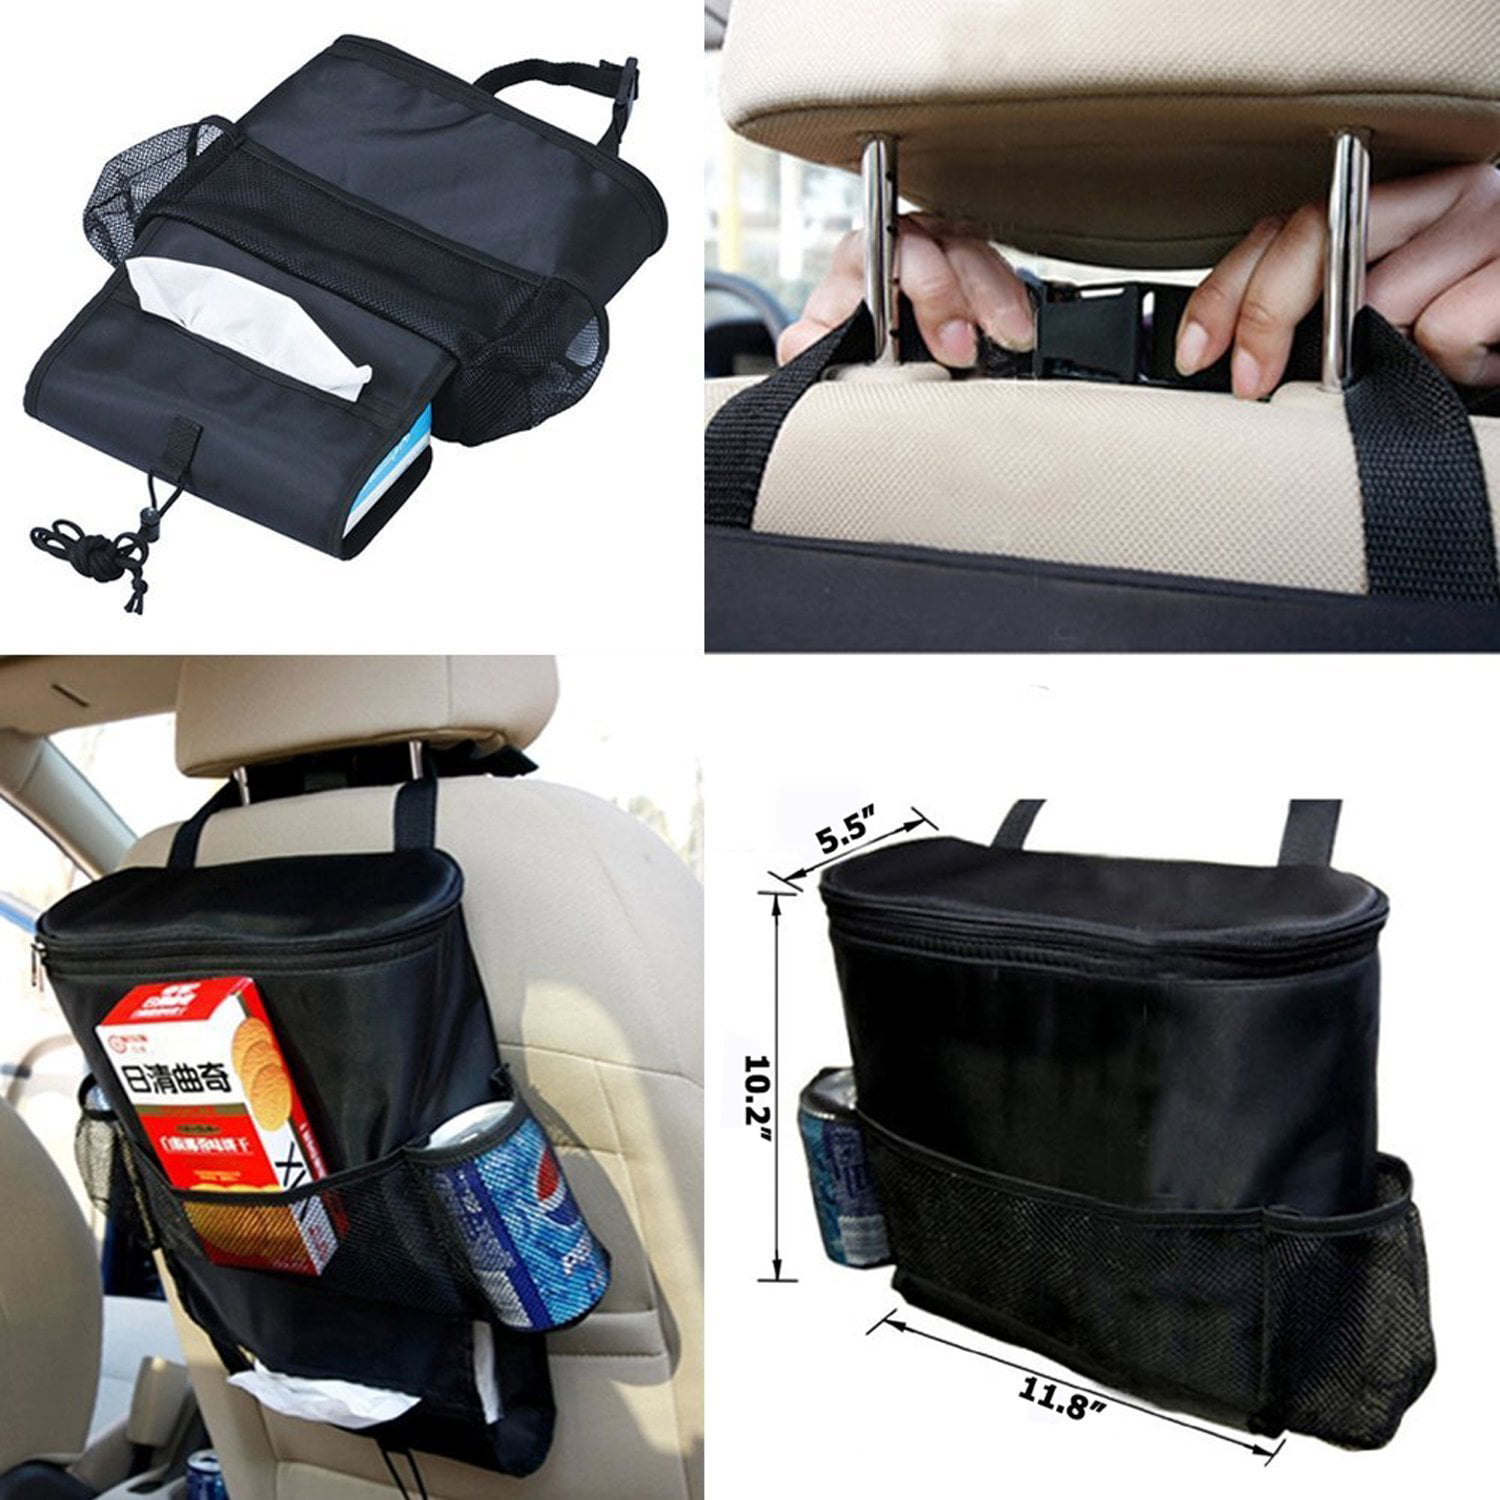 FrontTech Car Seat Back Organizer with Tablet Holder and Multi Storage Pockets 